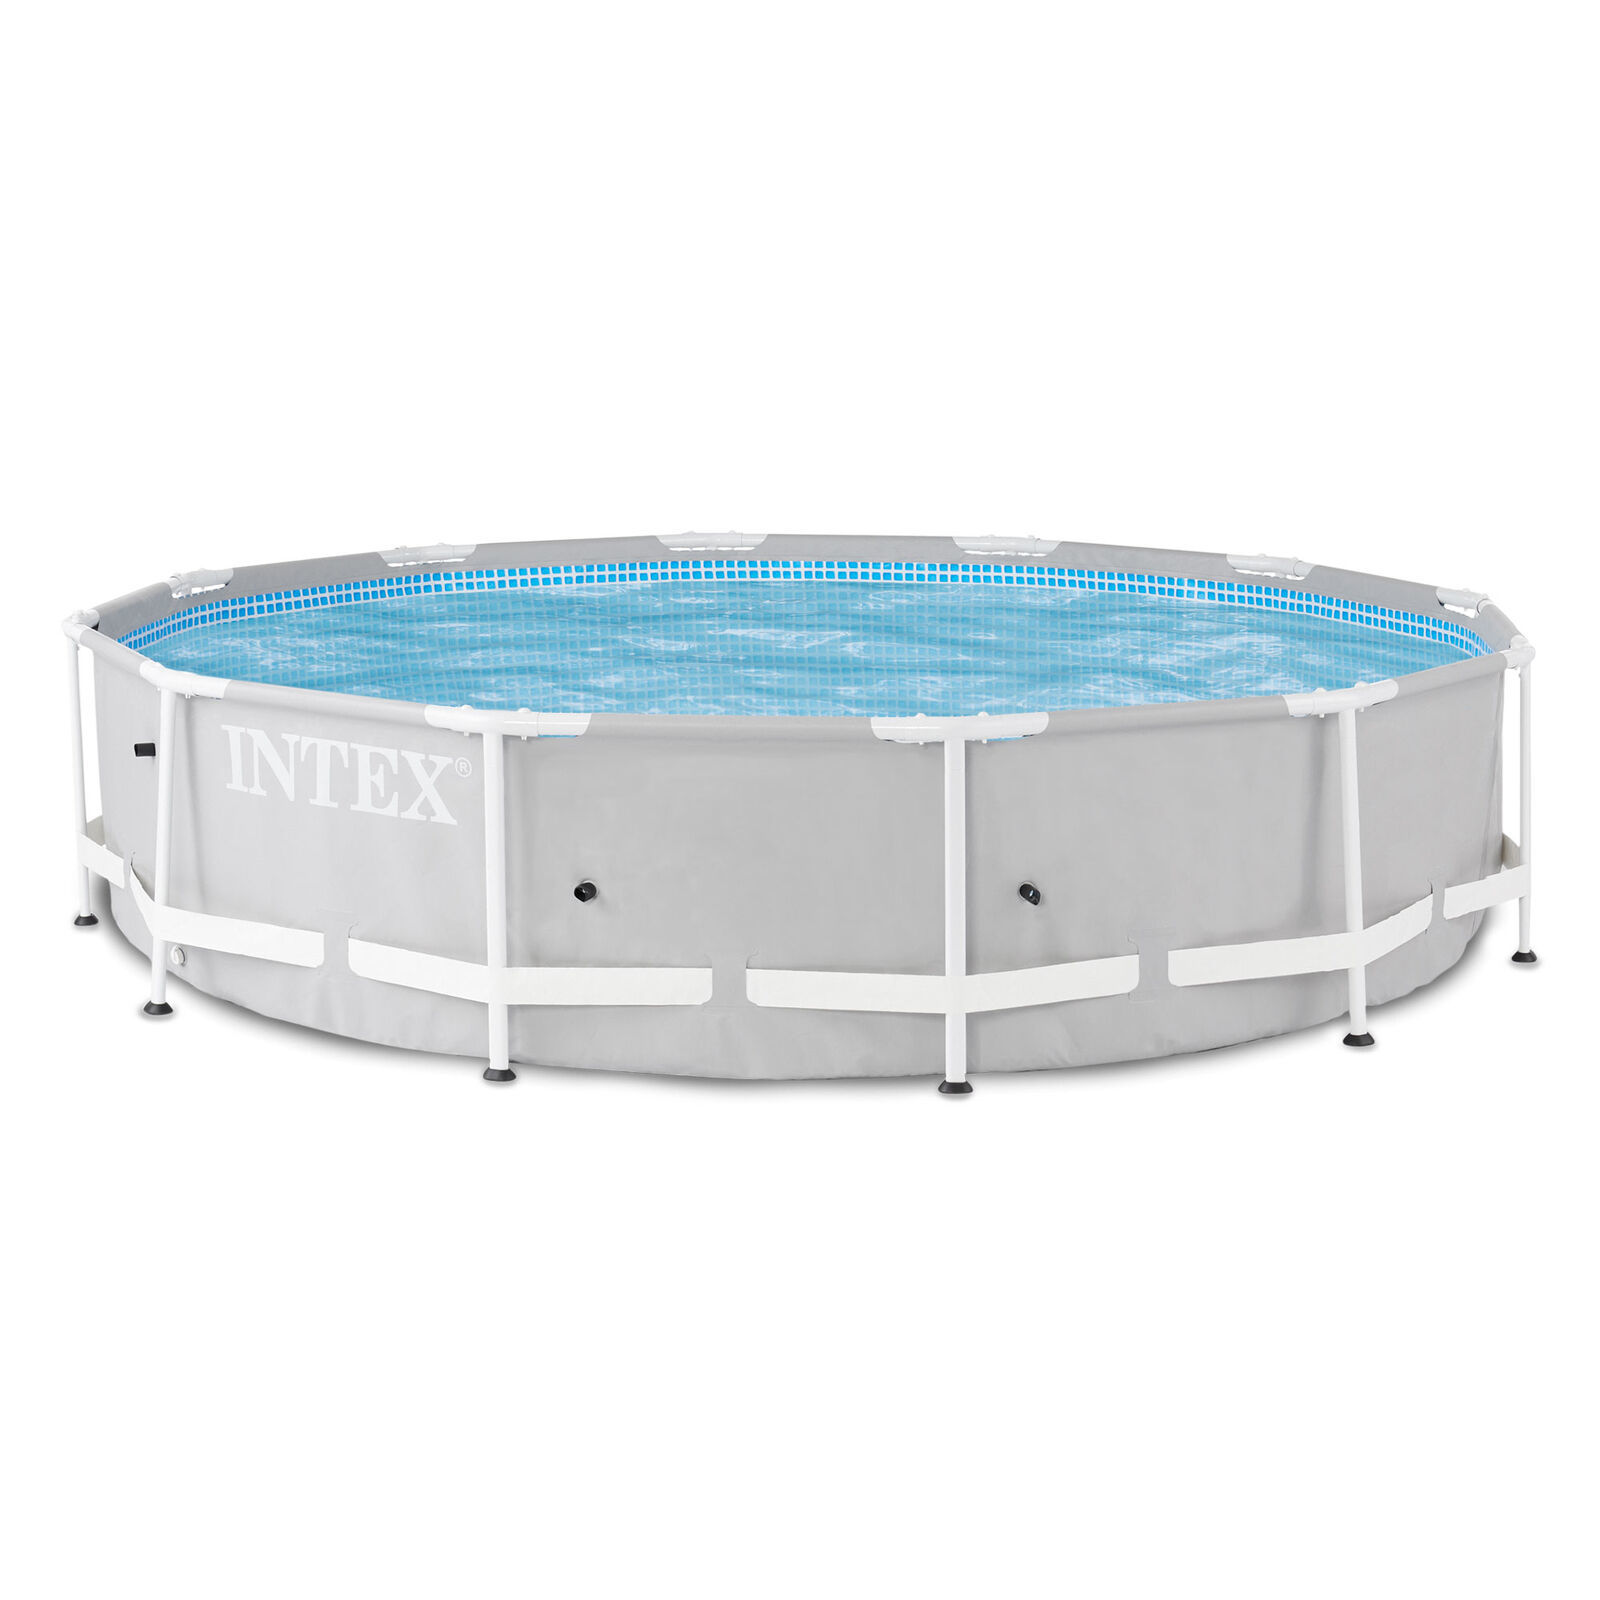 Primary image for Intex 12 foot x 30 inch Prism Frame Round Above Ground Swimming Pool, (No Pump)